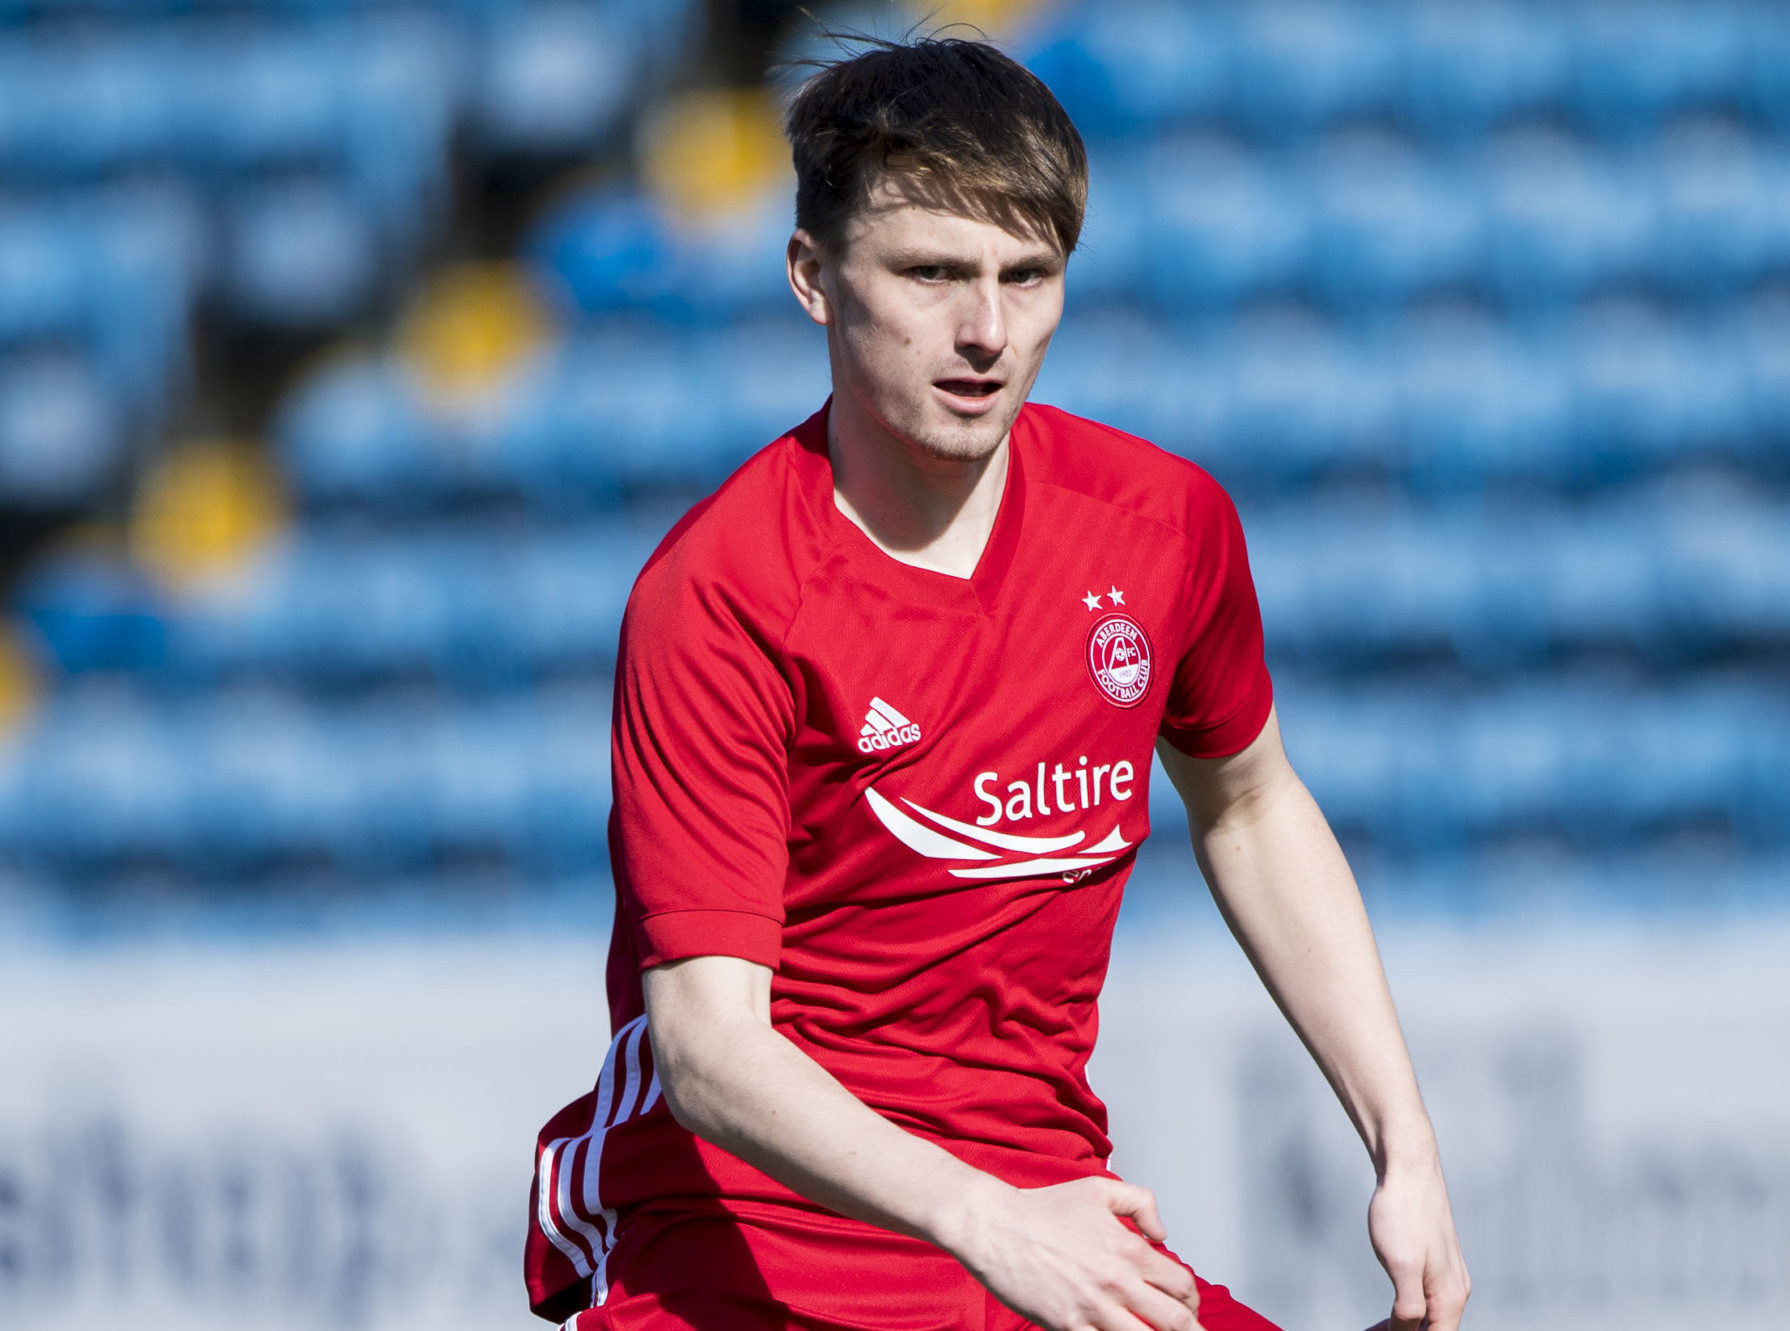 Chris Antoniazzi in action for Aberdeen in the 2018 SFA Youth Cup semi-final.